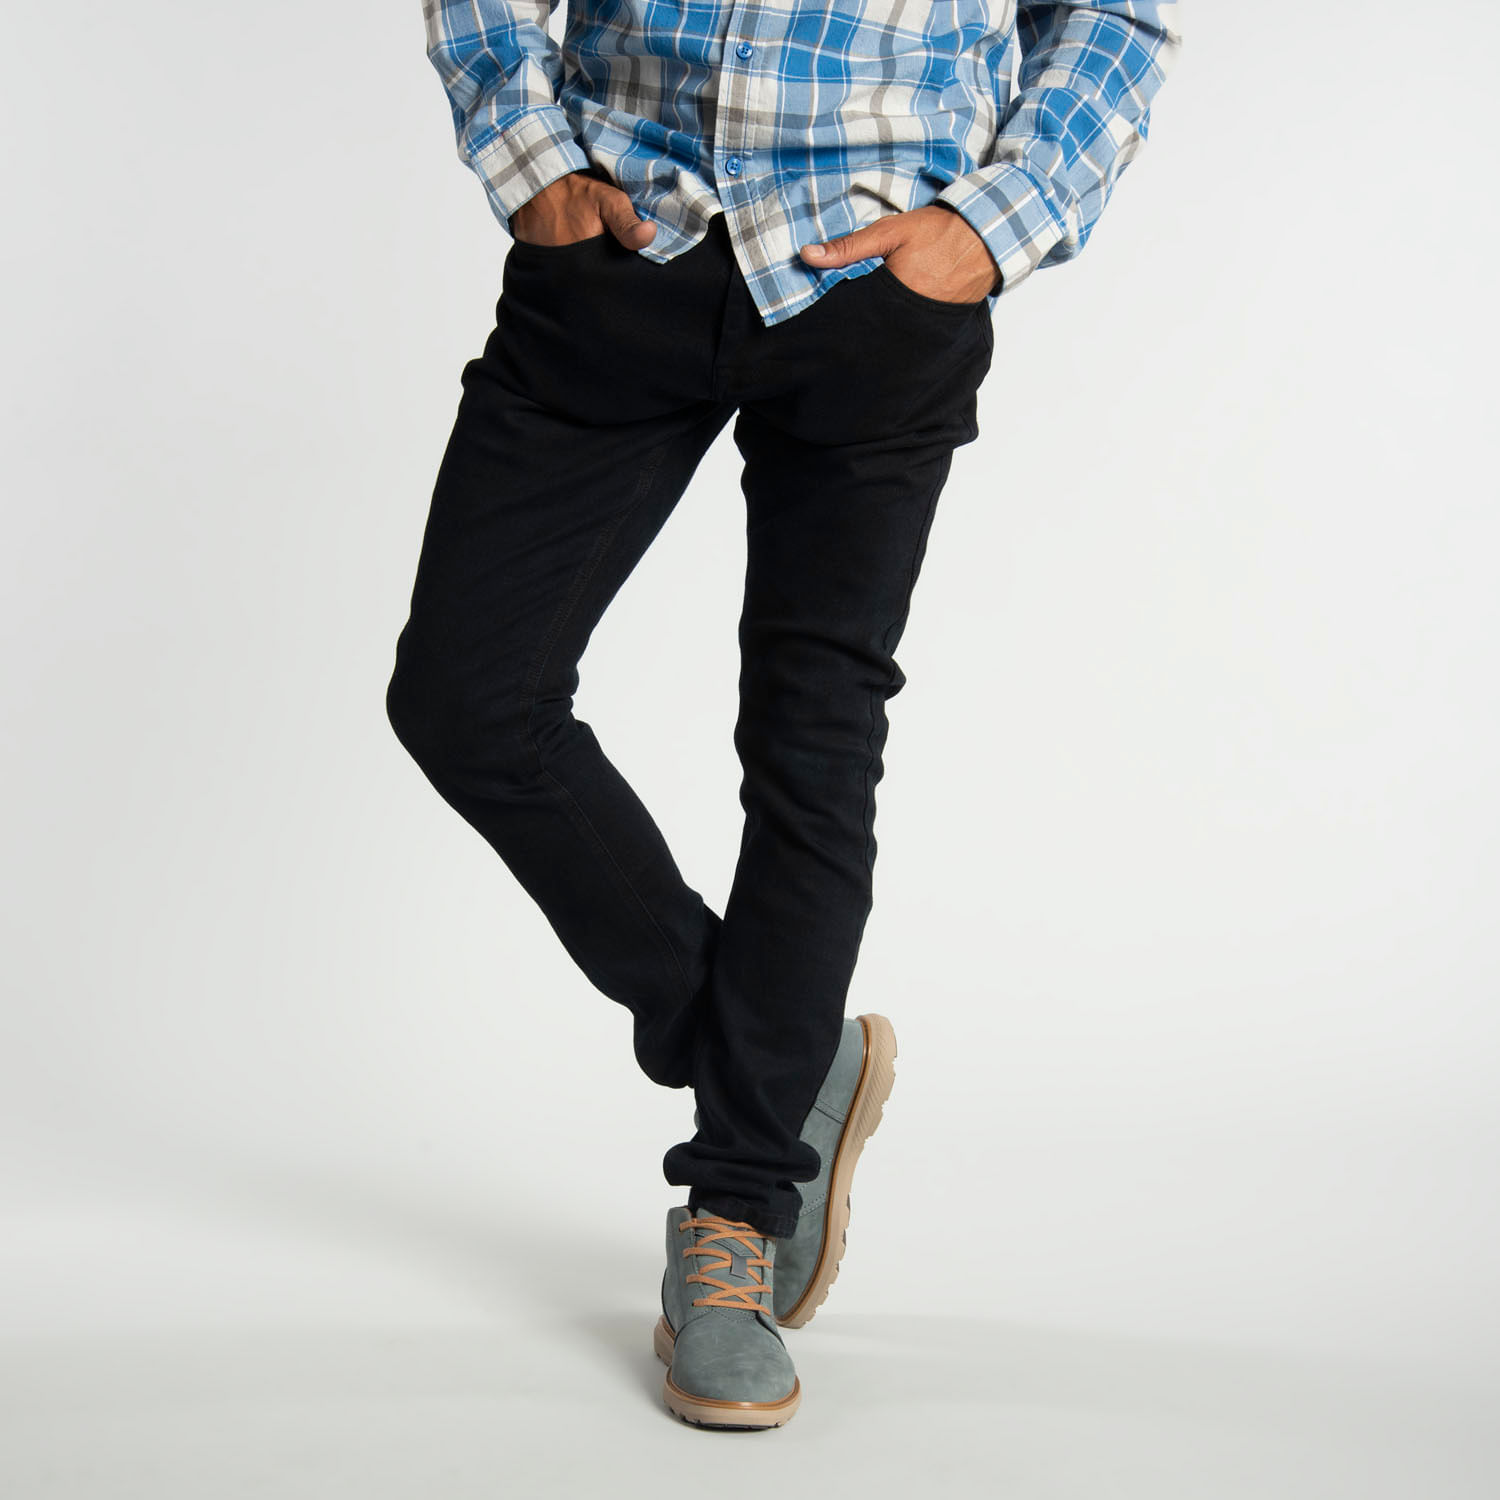 Jeans Hombre Ninety Eight Skinny - Tienda Oficial CAT Chile Cat | oficial Cat